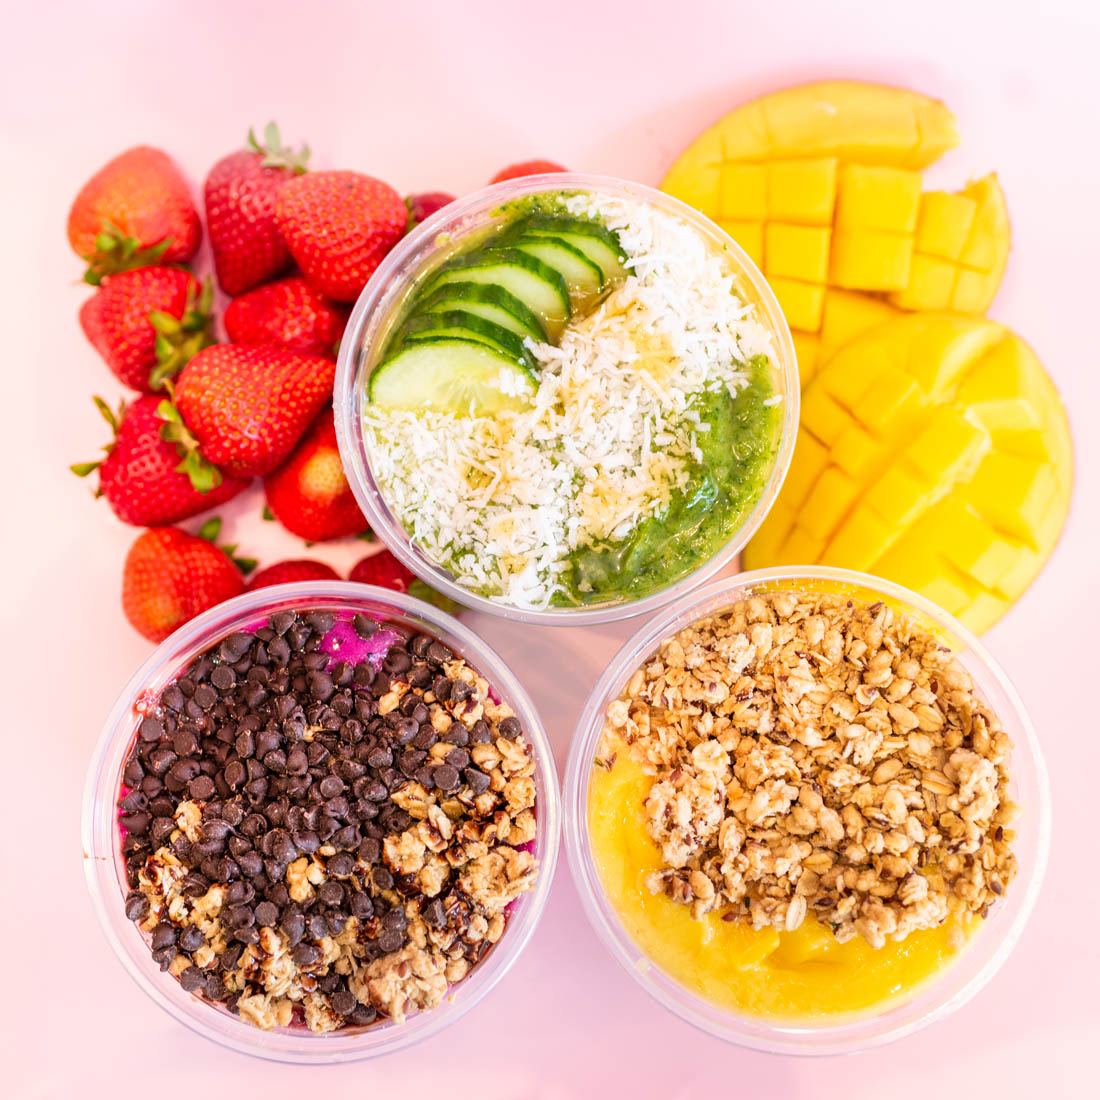 Rush Bowls smoothie bowls nutrition info in Raleigh, NC.